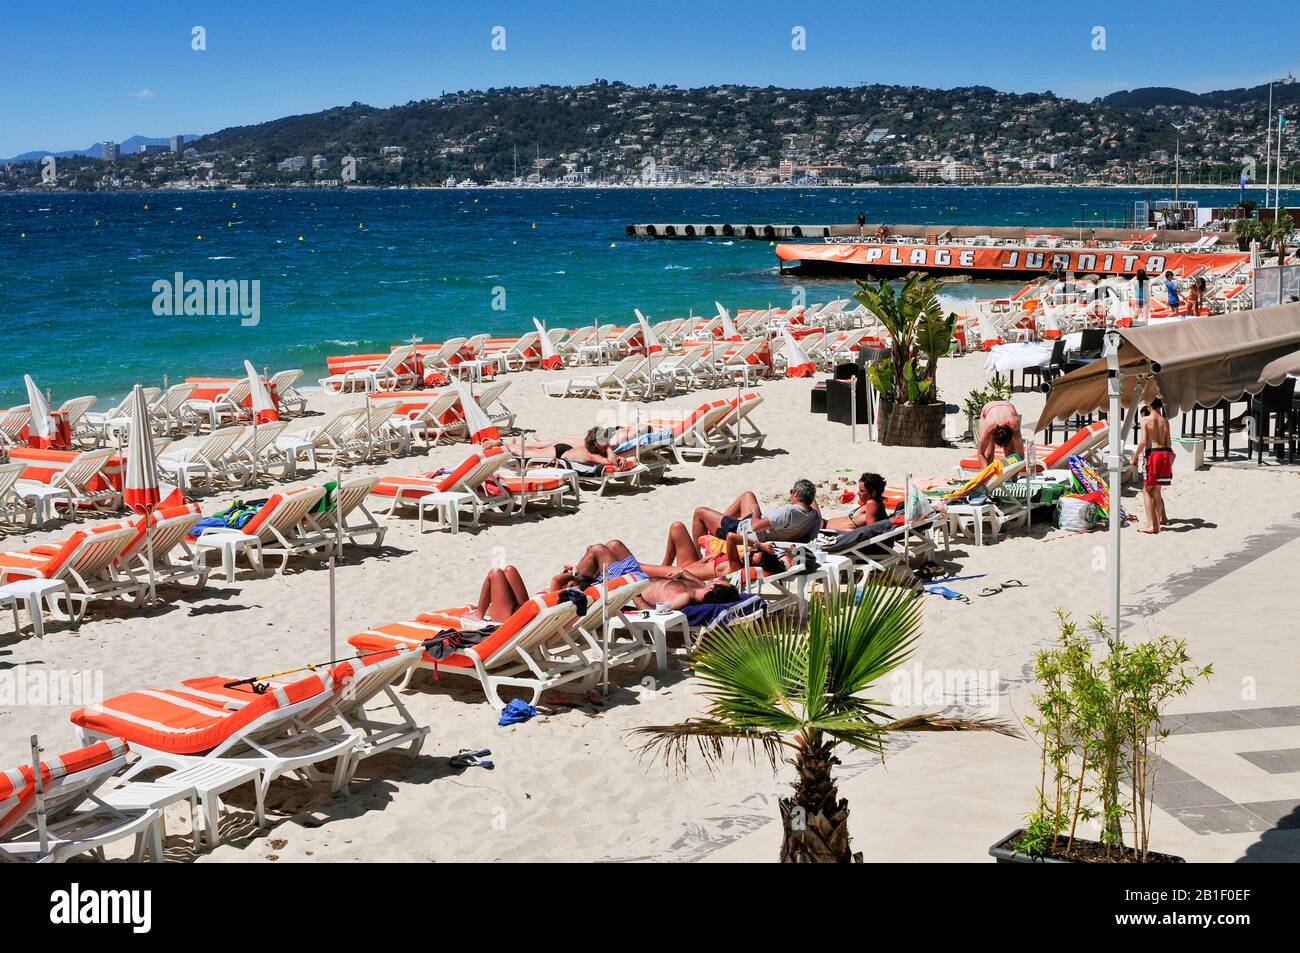 JUAN-LES-PINS, FRANCE - MAY 15: People sunbathing in sunloungers on the beach on May 15, 2015 in Juan-Les-Pins, France. Juan-Les-Pins is a well-known Stock Photo